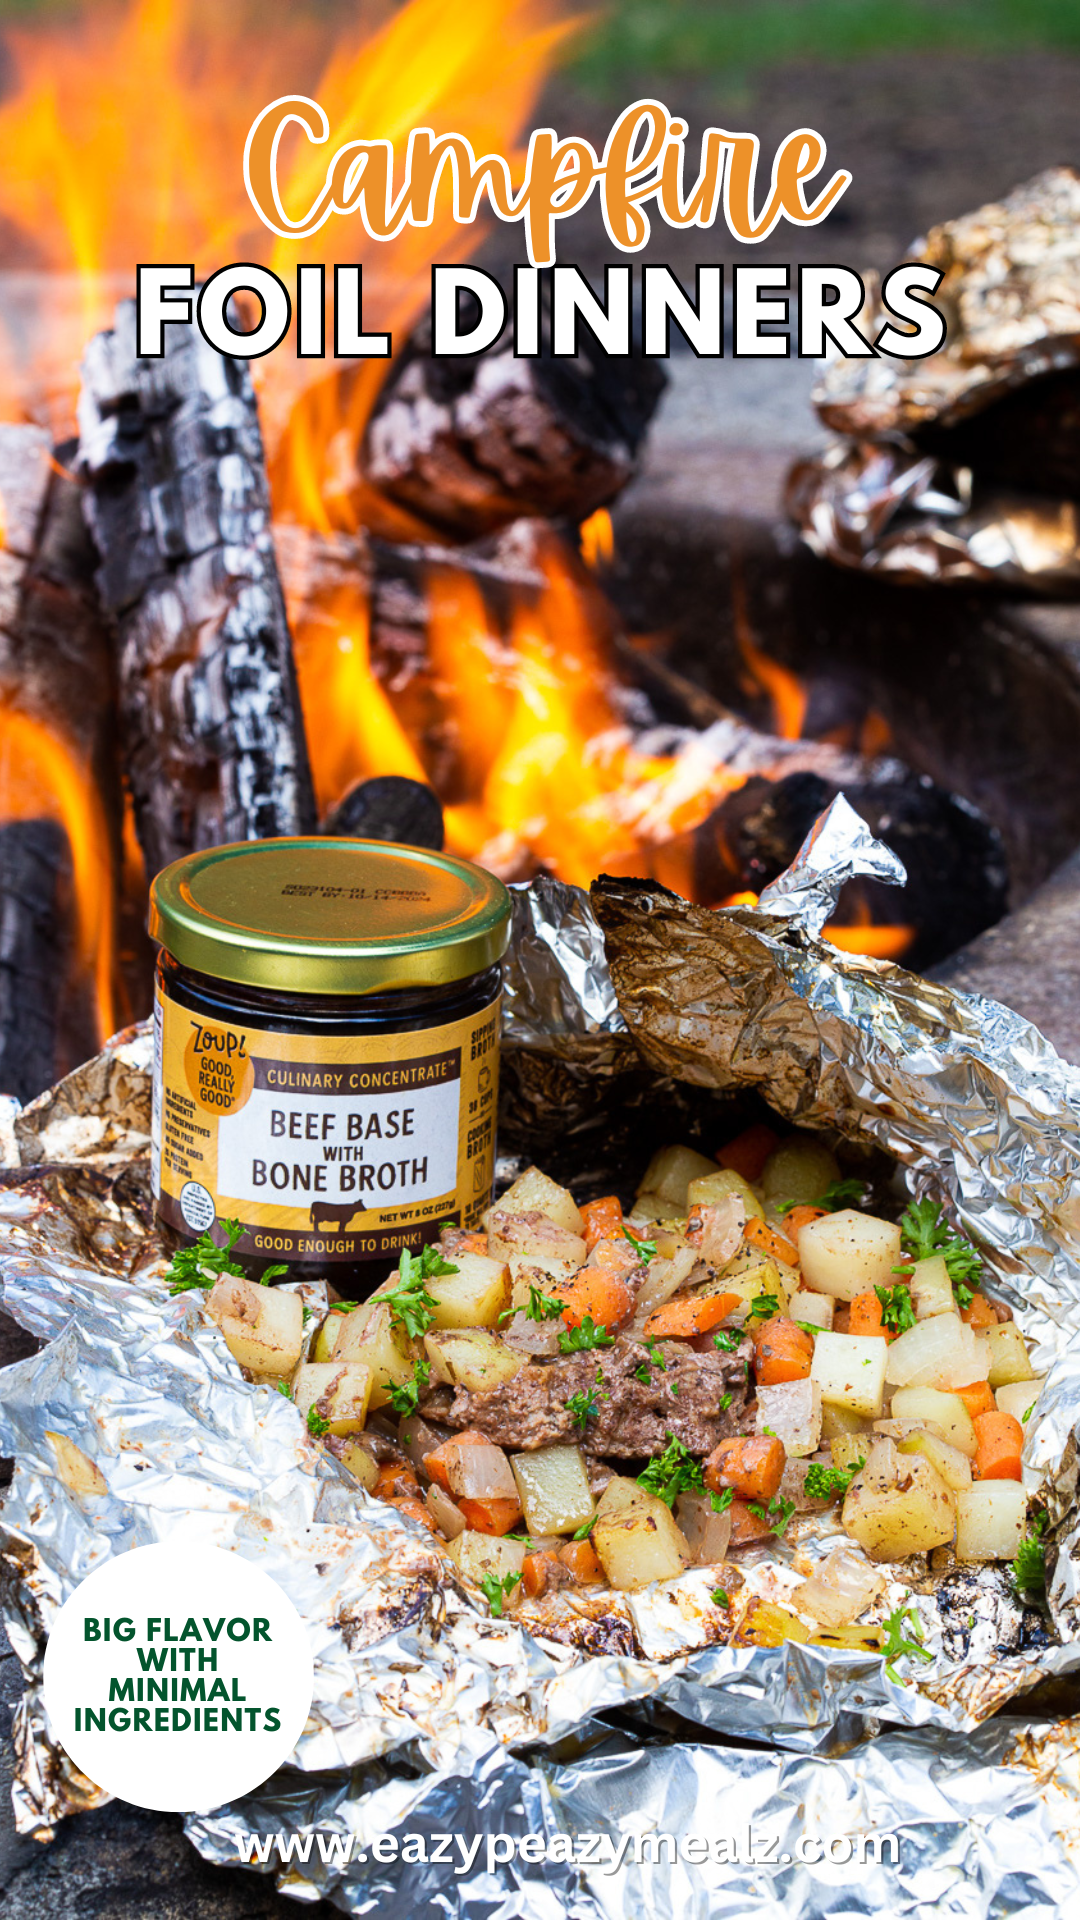 Campfire foil dinners are loaded with flavor, but have minimal ingredients, easy and delicious.